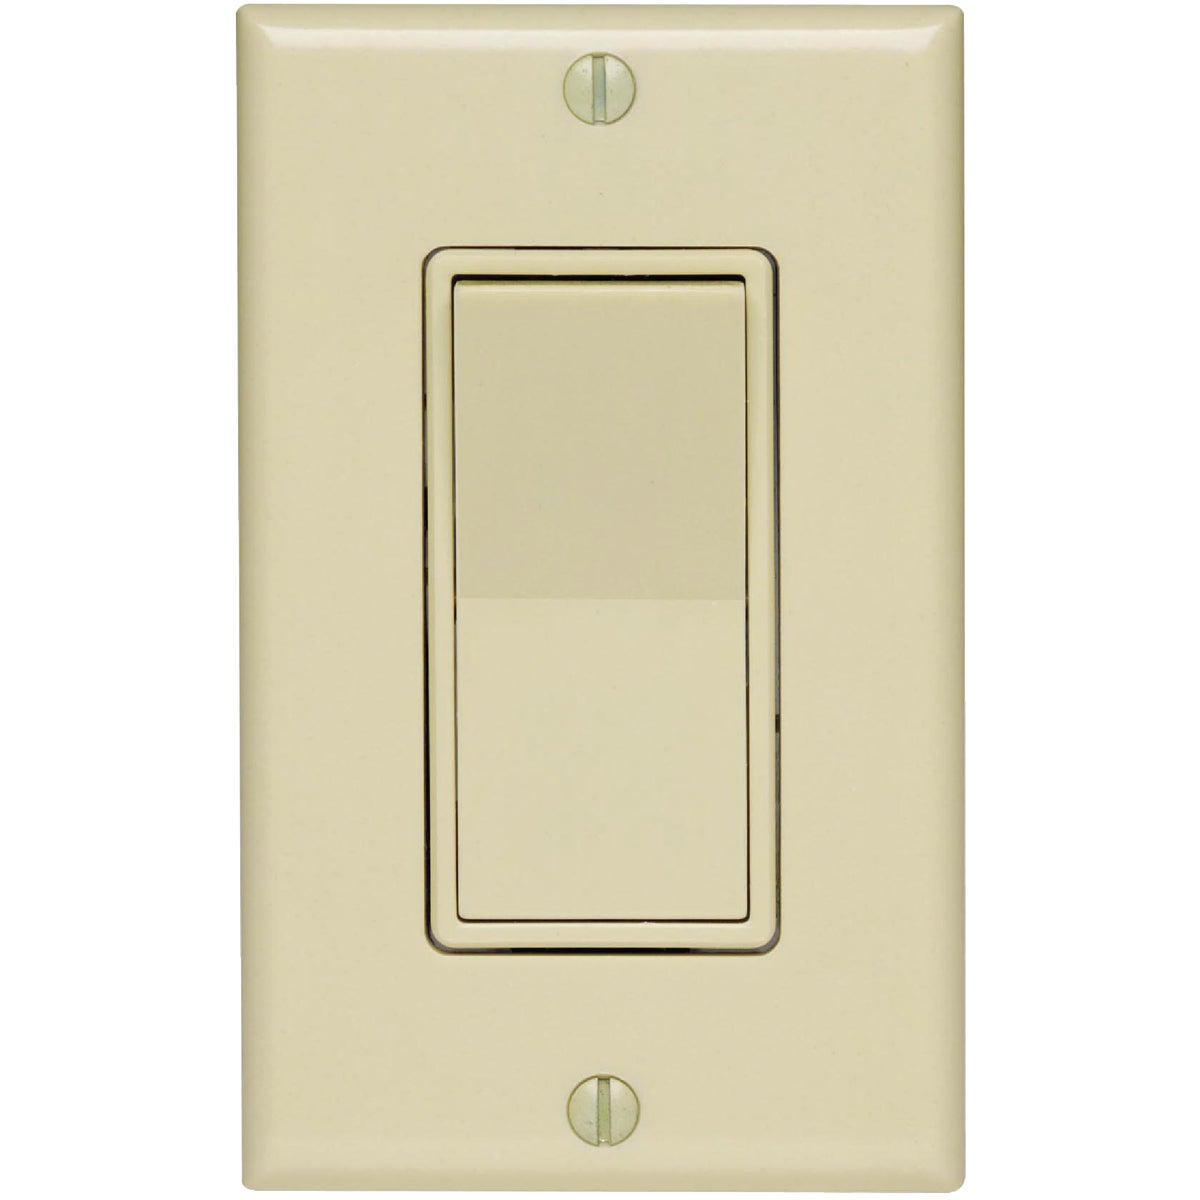 Item 529832, Single pole switch ideal for controlling one fixture from a single location